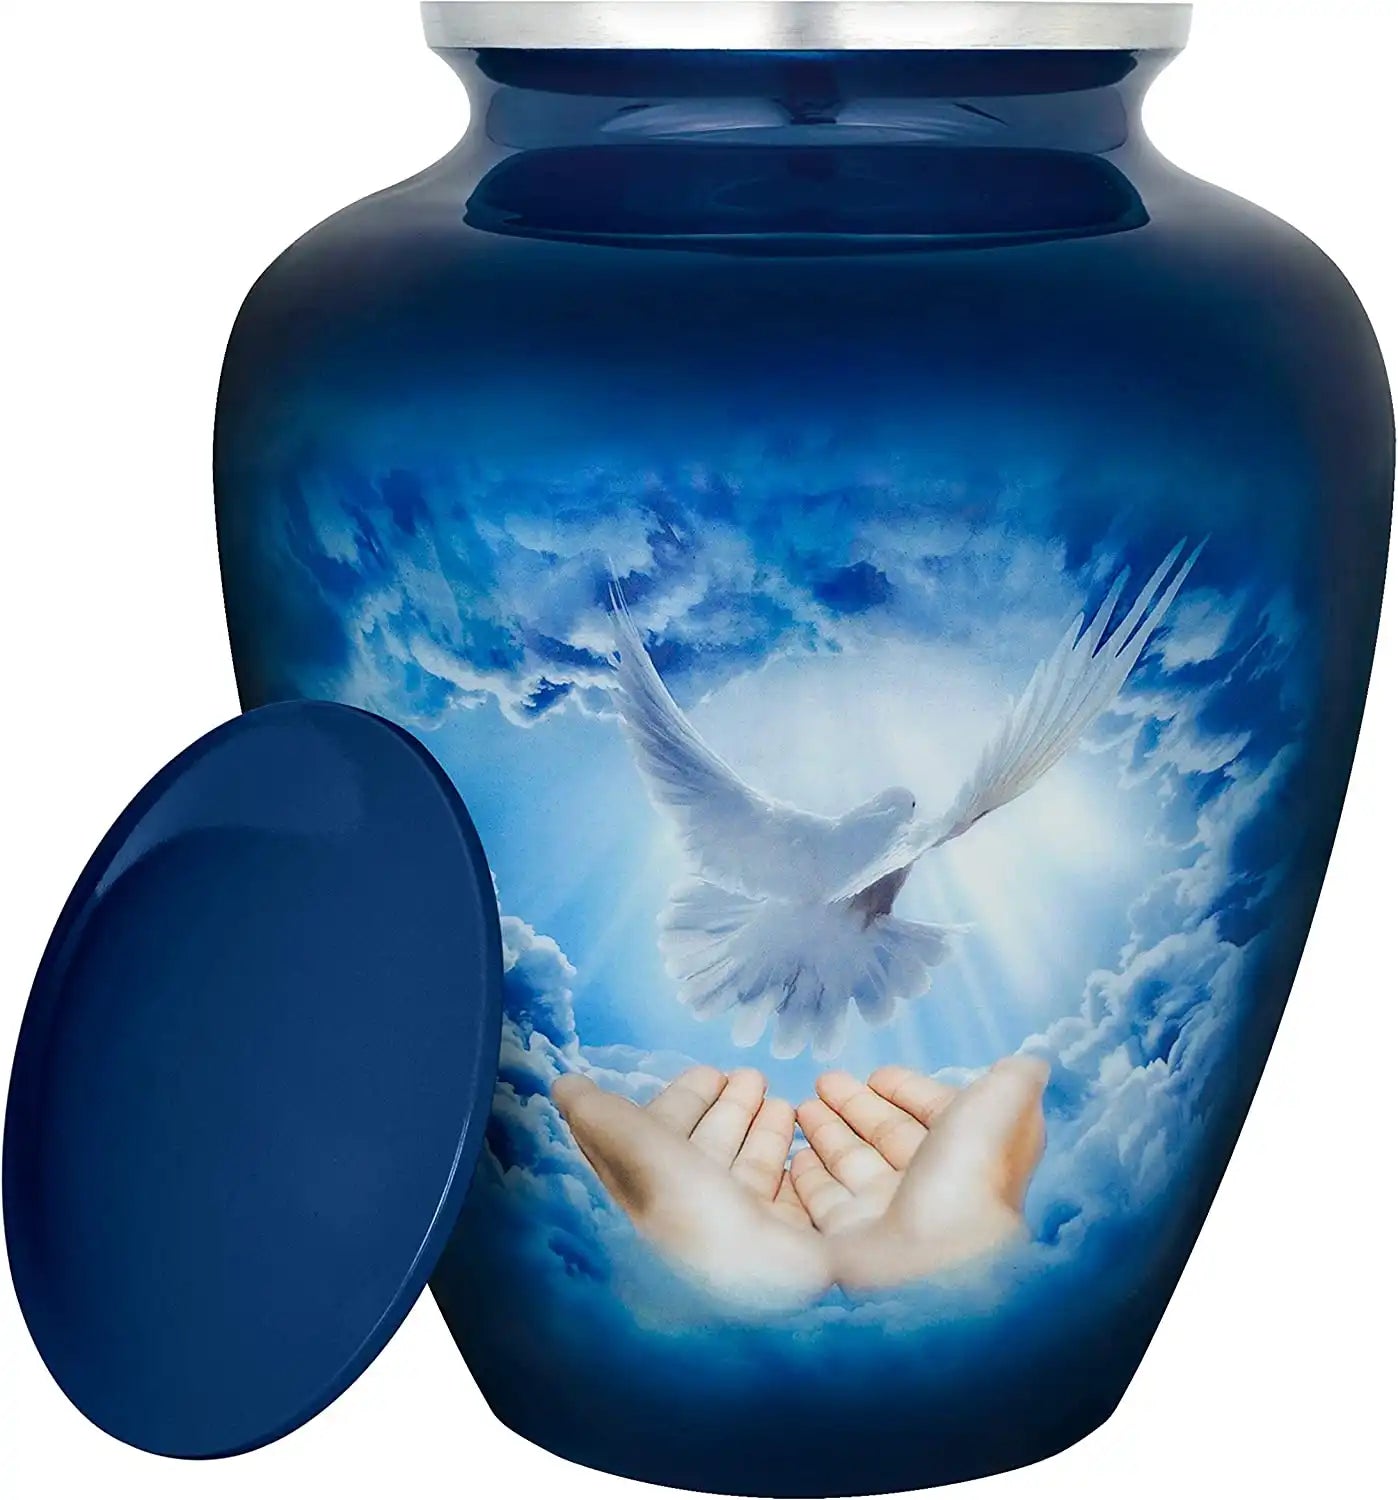 Dove Urn for Ashes - Handcrafted Cremation Urn, Large Burial Urns for Ashes Adult Male - Urns for Human Ashes Adult Female, Funeral Decorative Urns - Dove, Up to 200 LBS